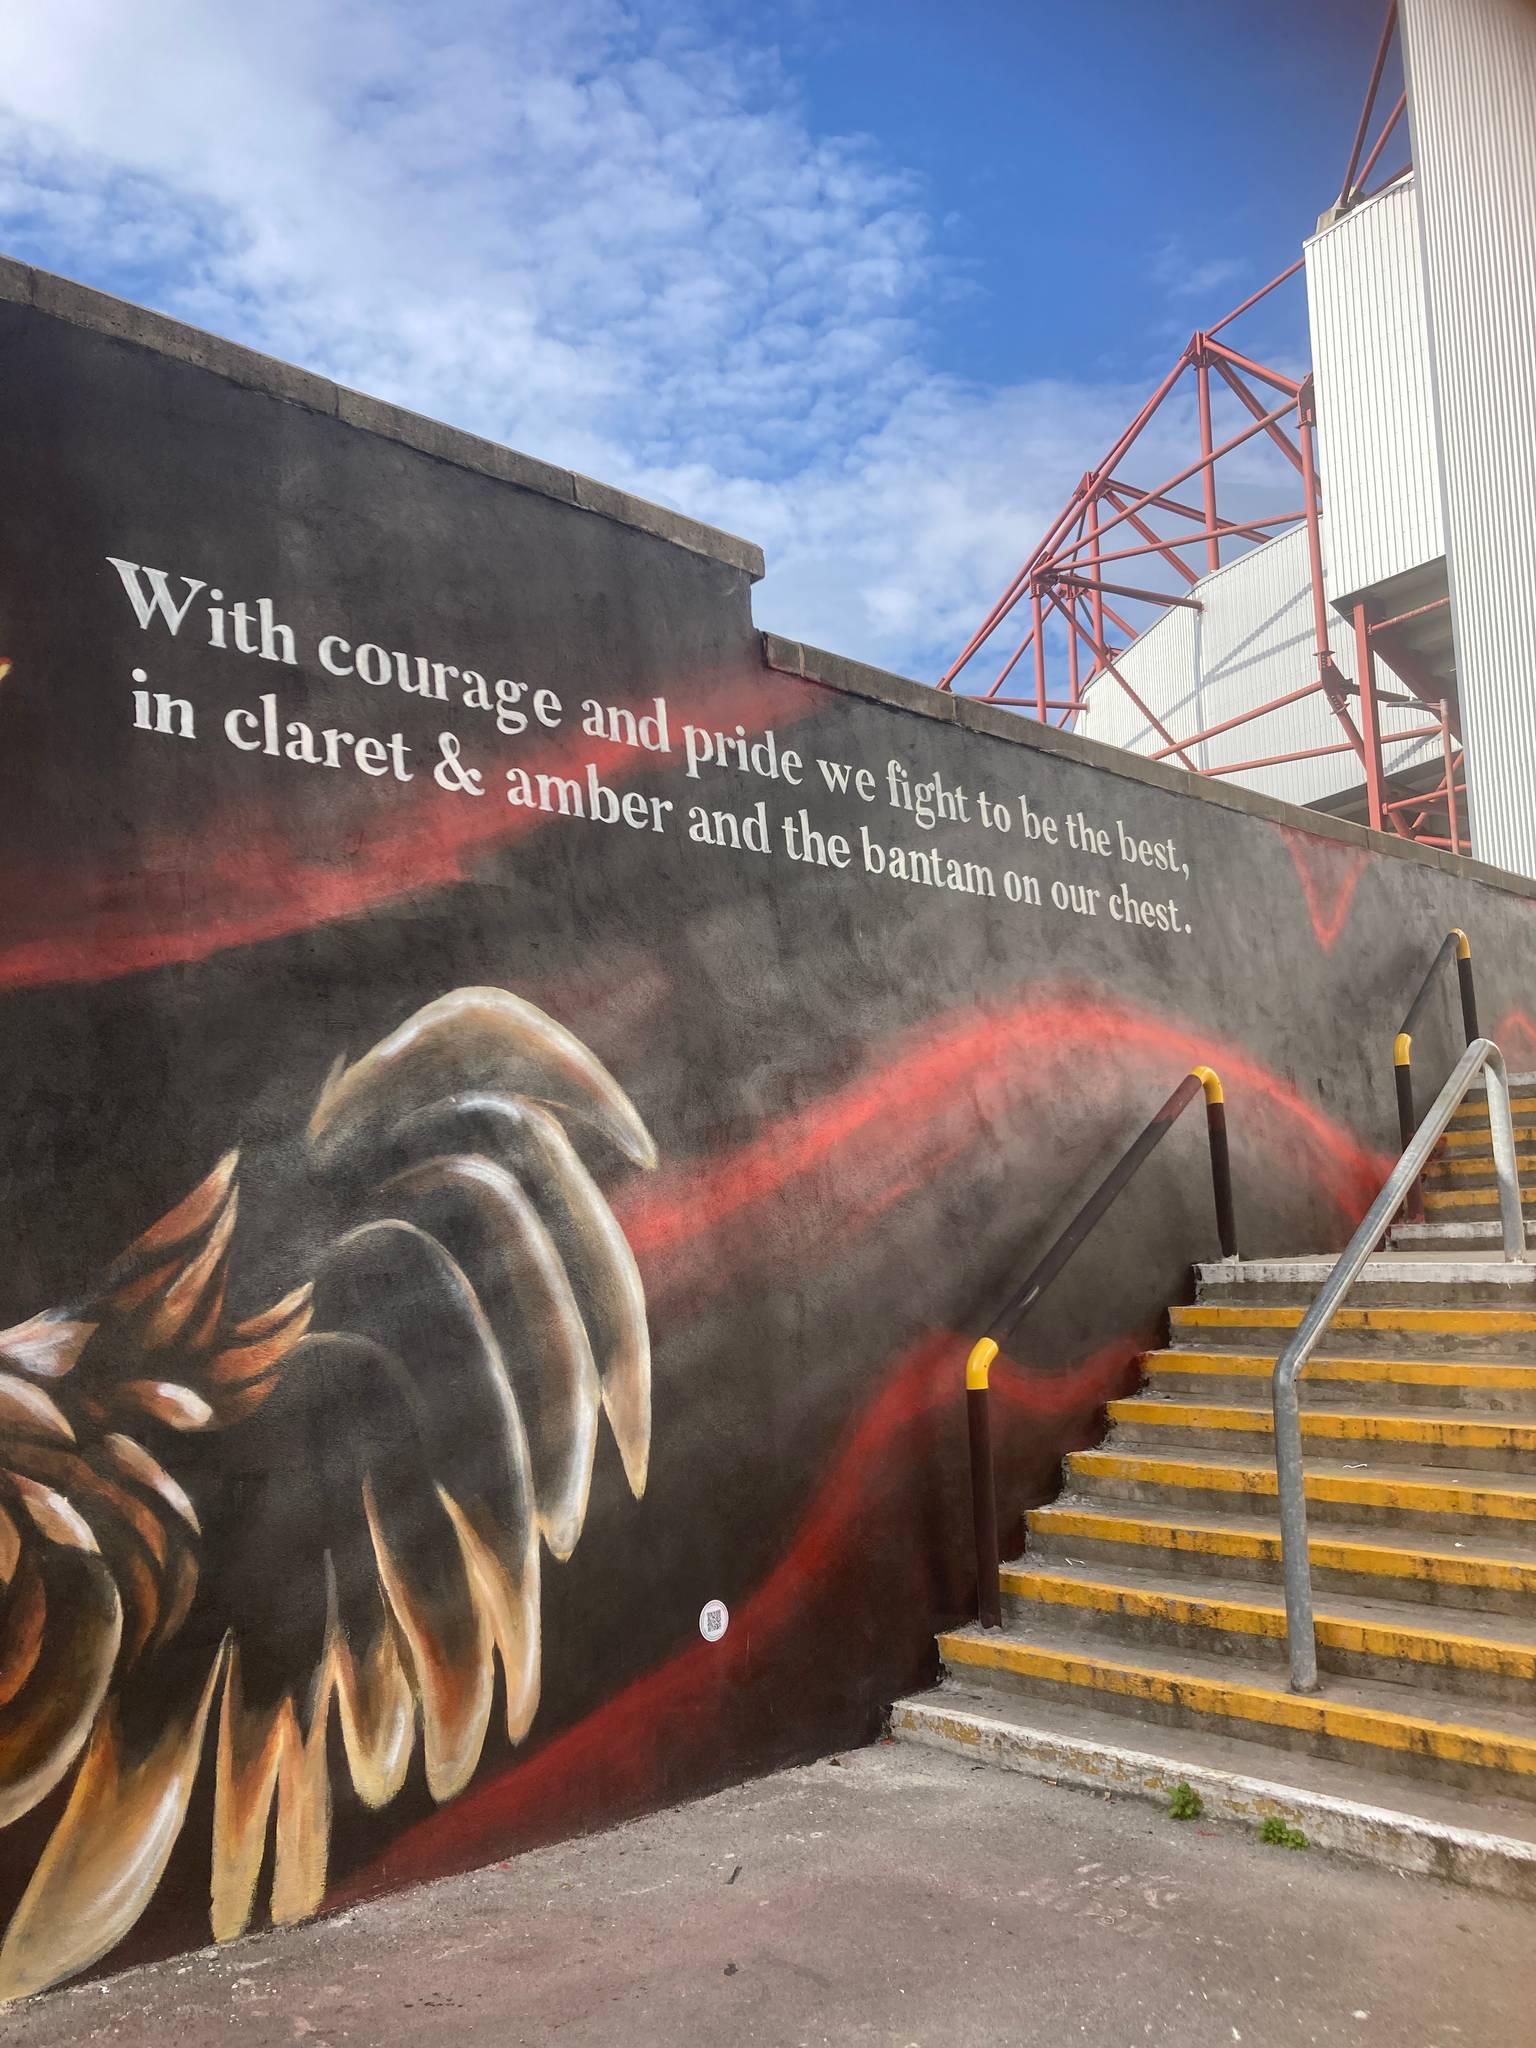 Paul Curtis&mdash;With courage and pride we fight in claret and amber…